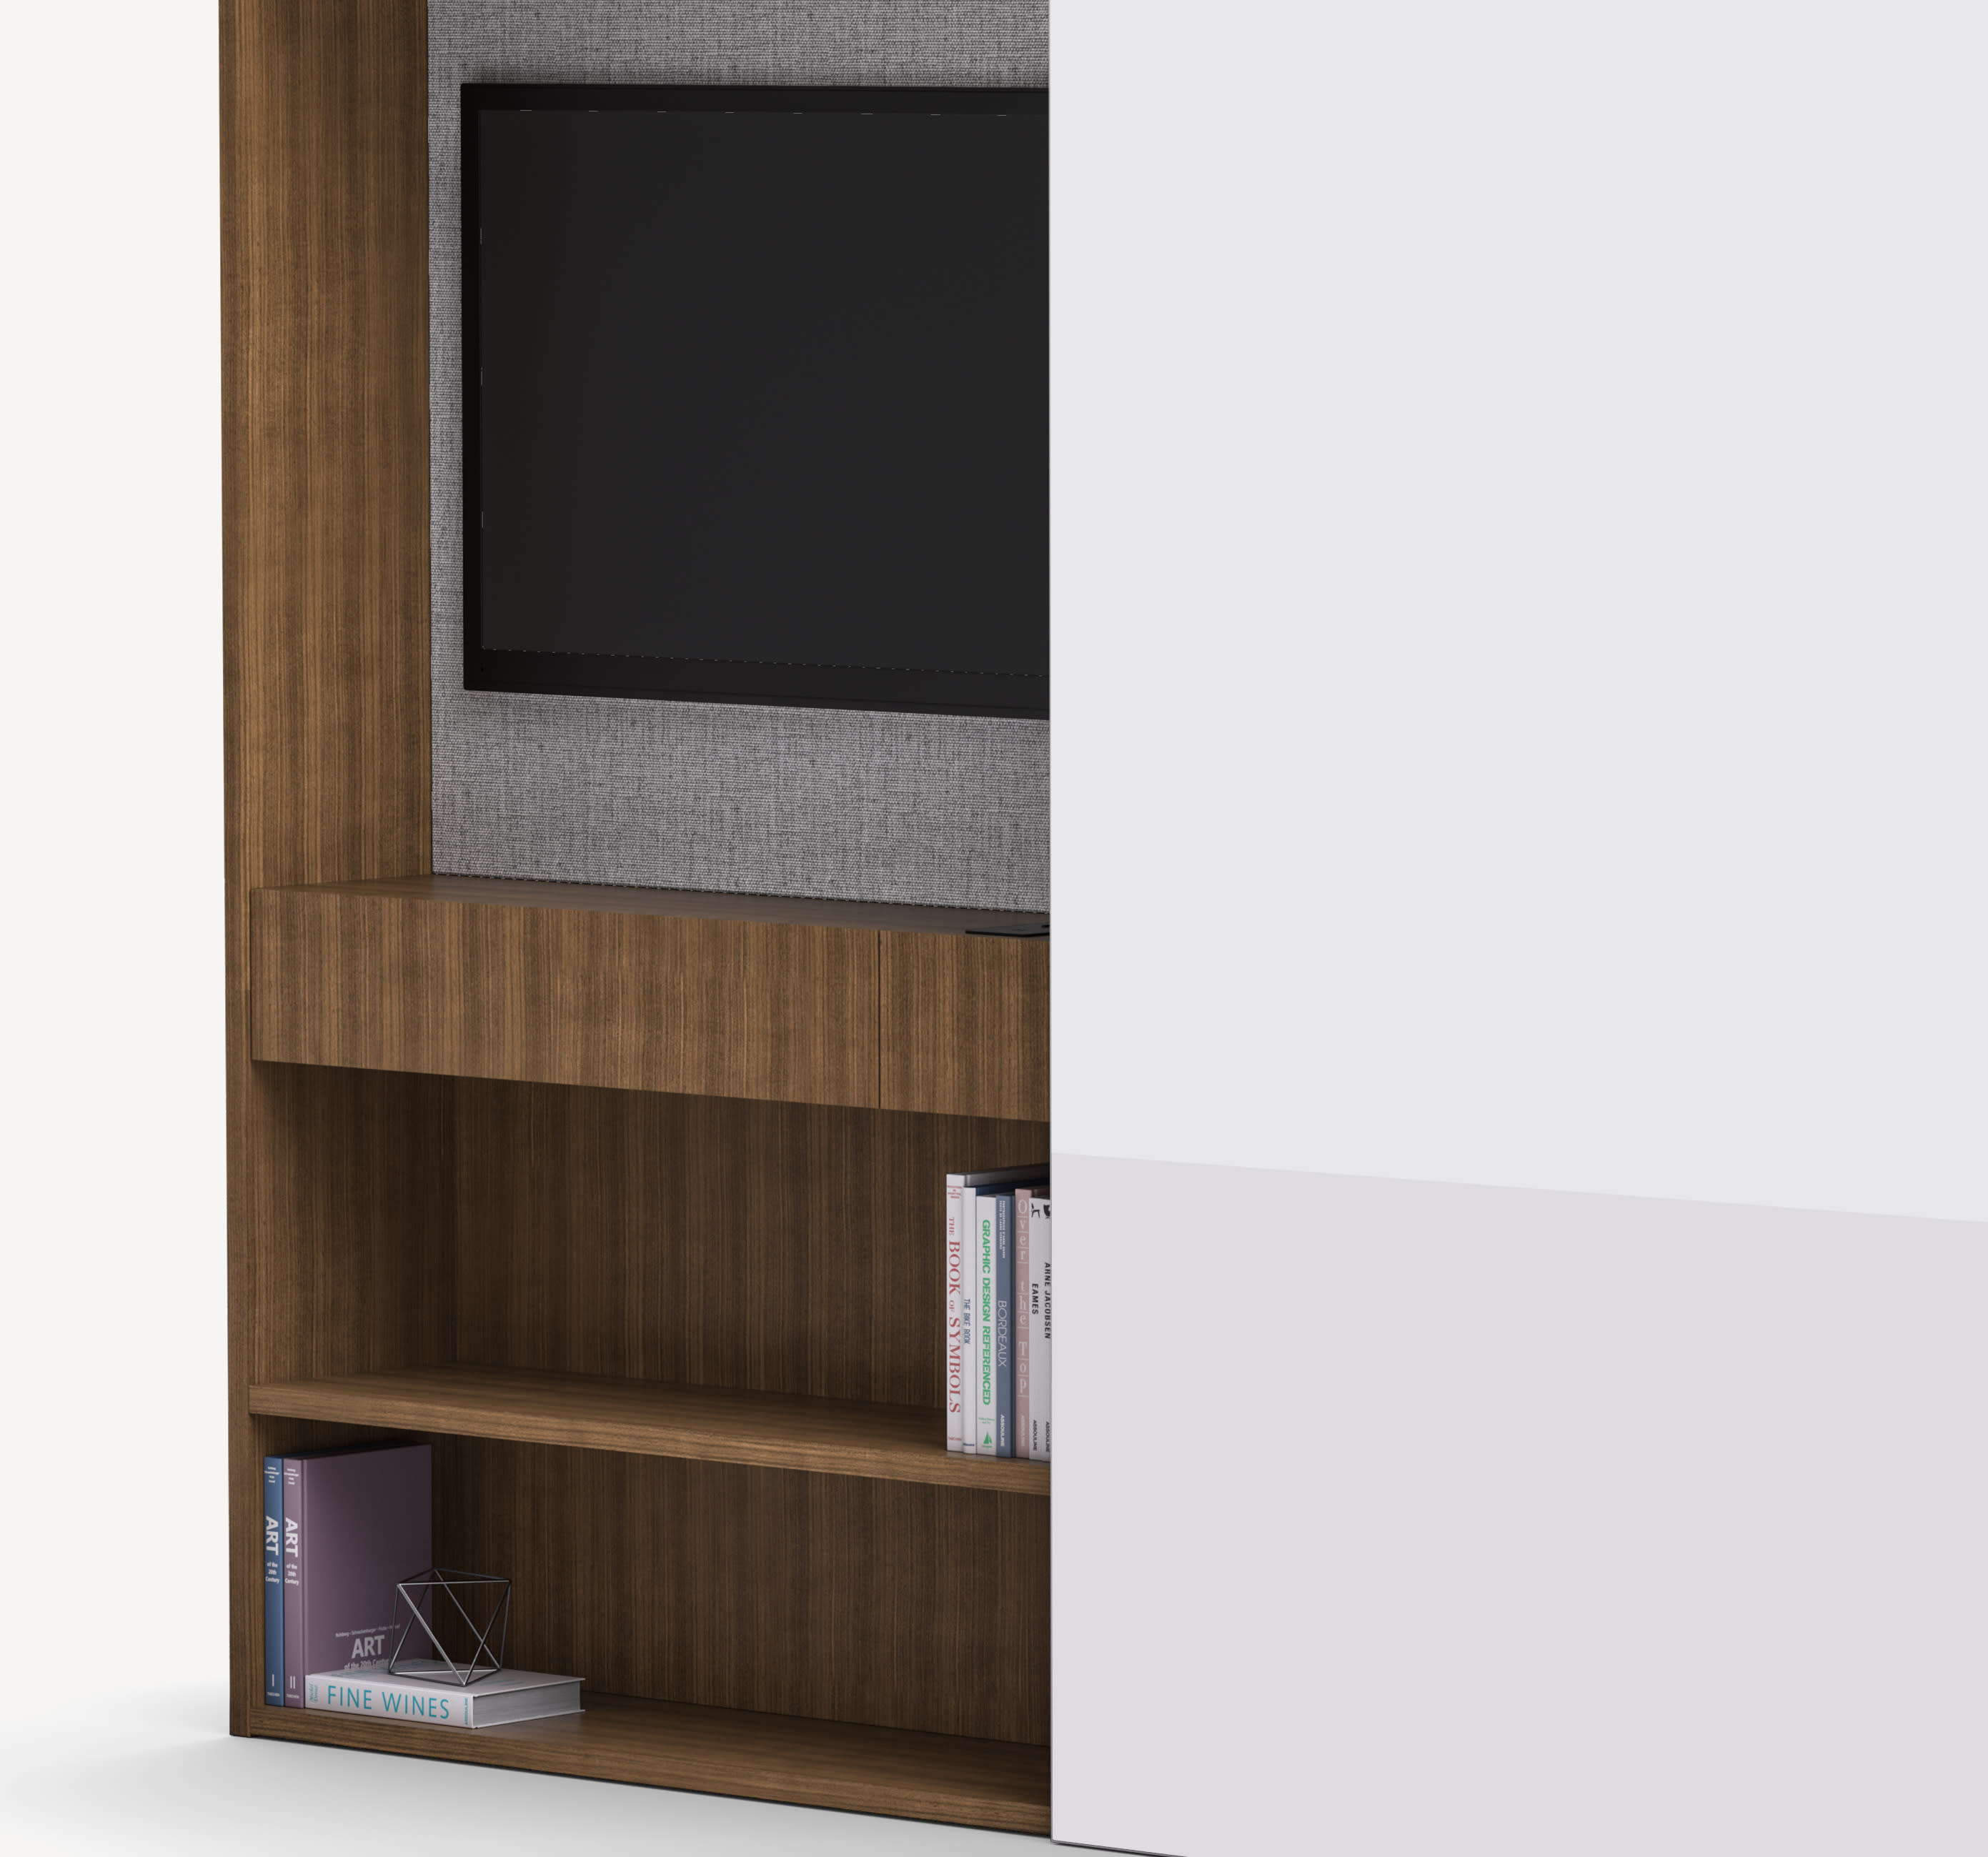 Detail view of the Gunlocke Silea Work Wall with closet on the left-hand side with a white door and brown wood TV mount on the right side above a shelf.